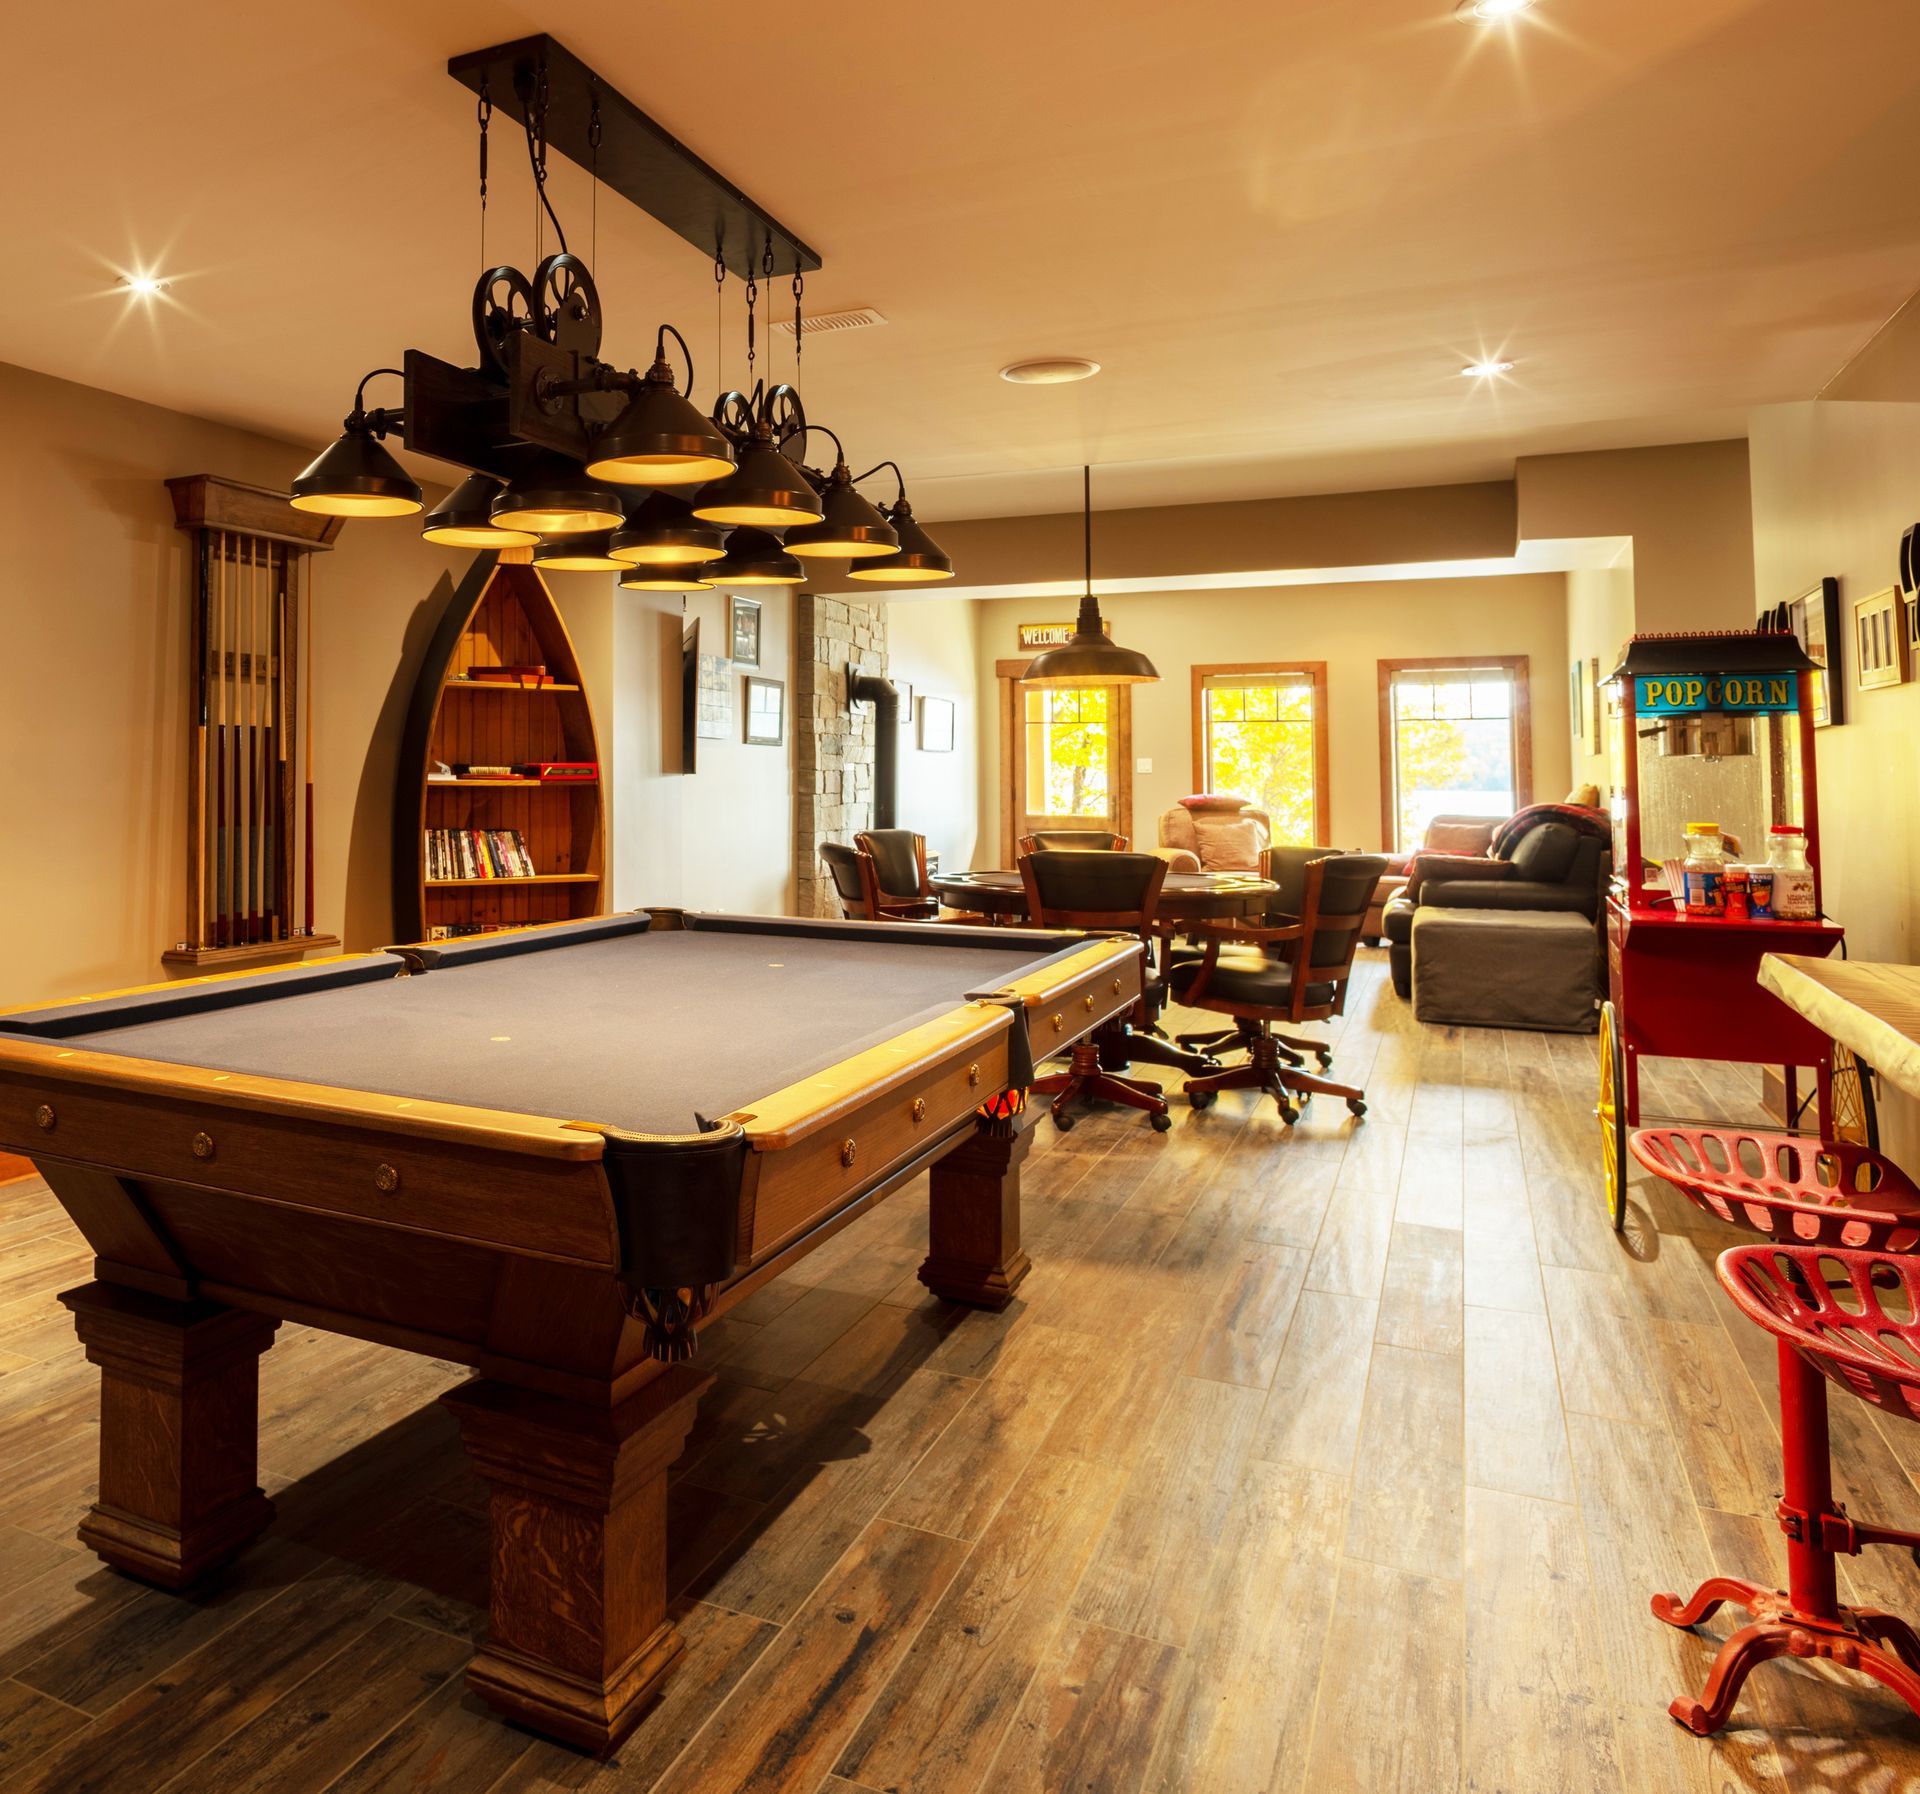 Large, bright, open room with pool table and card table, bar with stools.